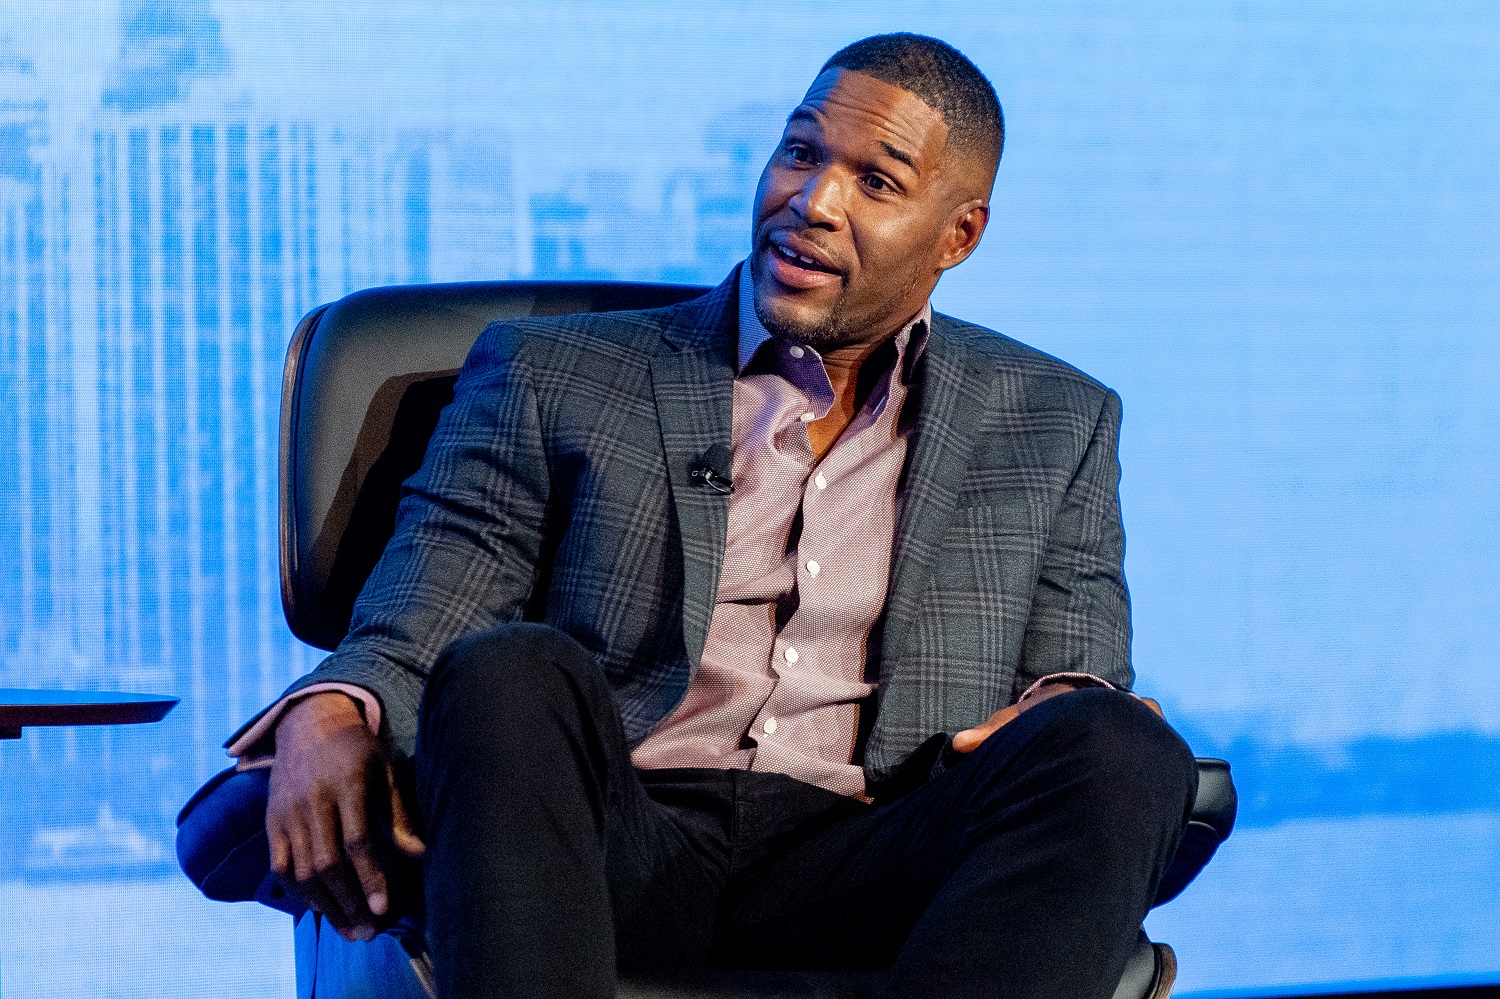 Michael Strahan on stage during the 2021 Black Entrepreneurs Day at The Apollo Theater on Oct. 6, 2021, in New York City.